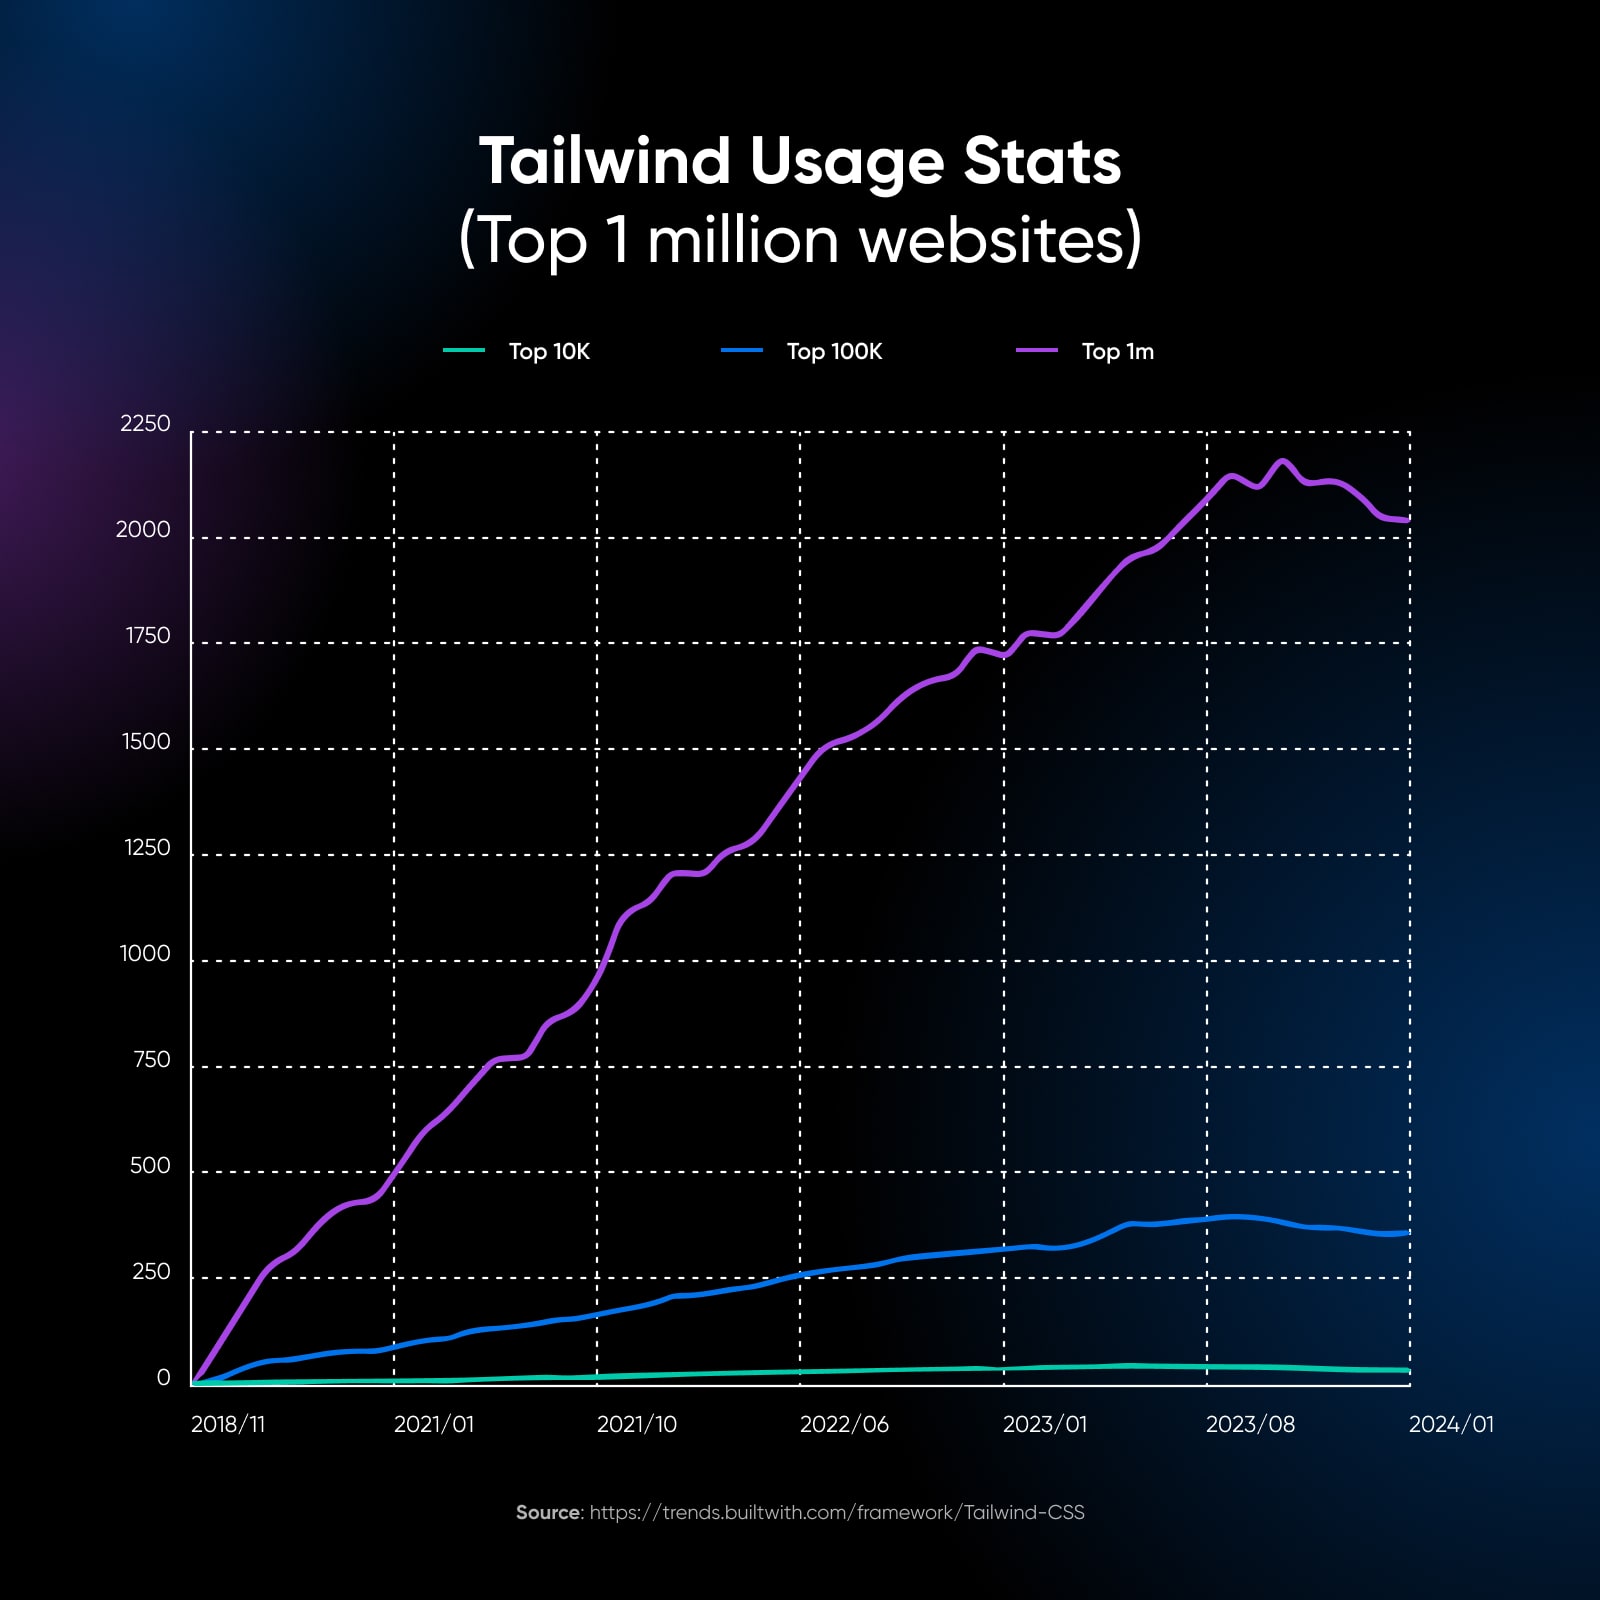 "Tailwind Usage Stats" of the top 1 million websites with a chart showing Tailwind growth.